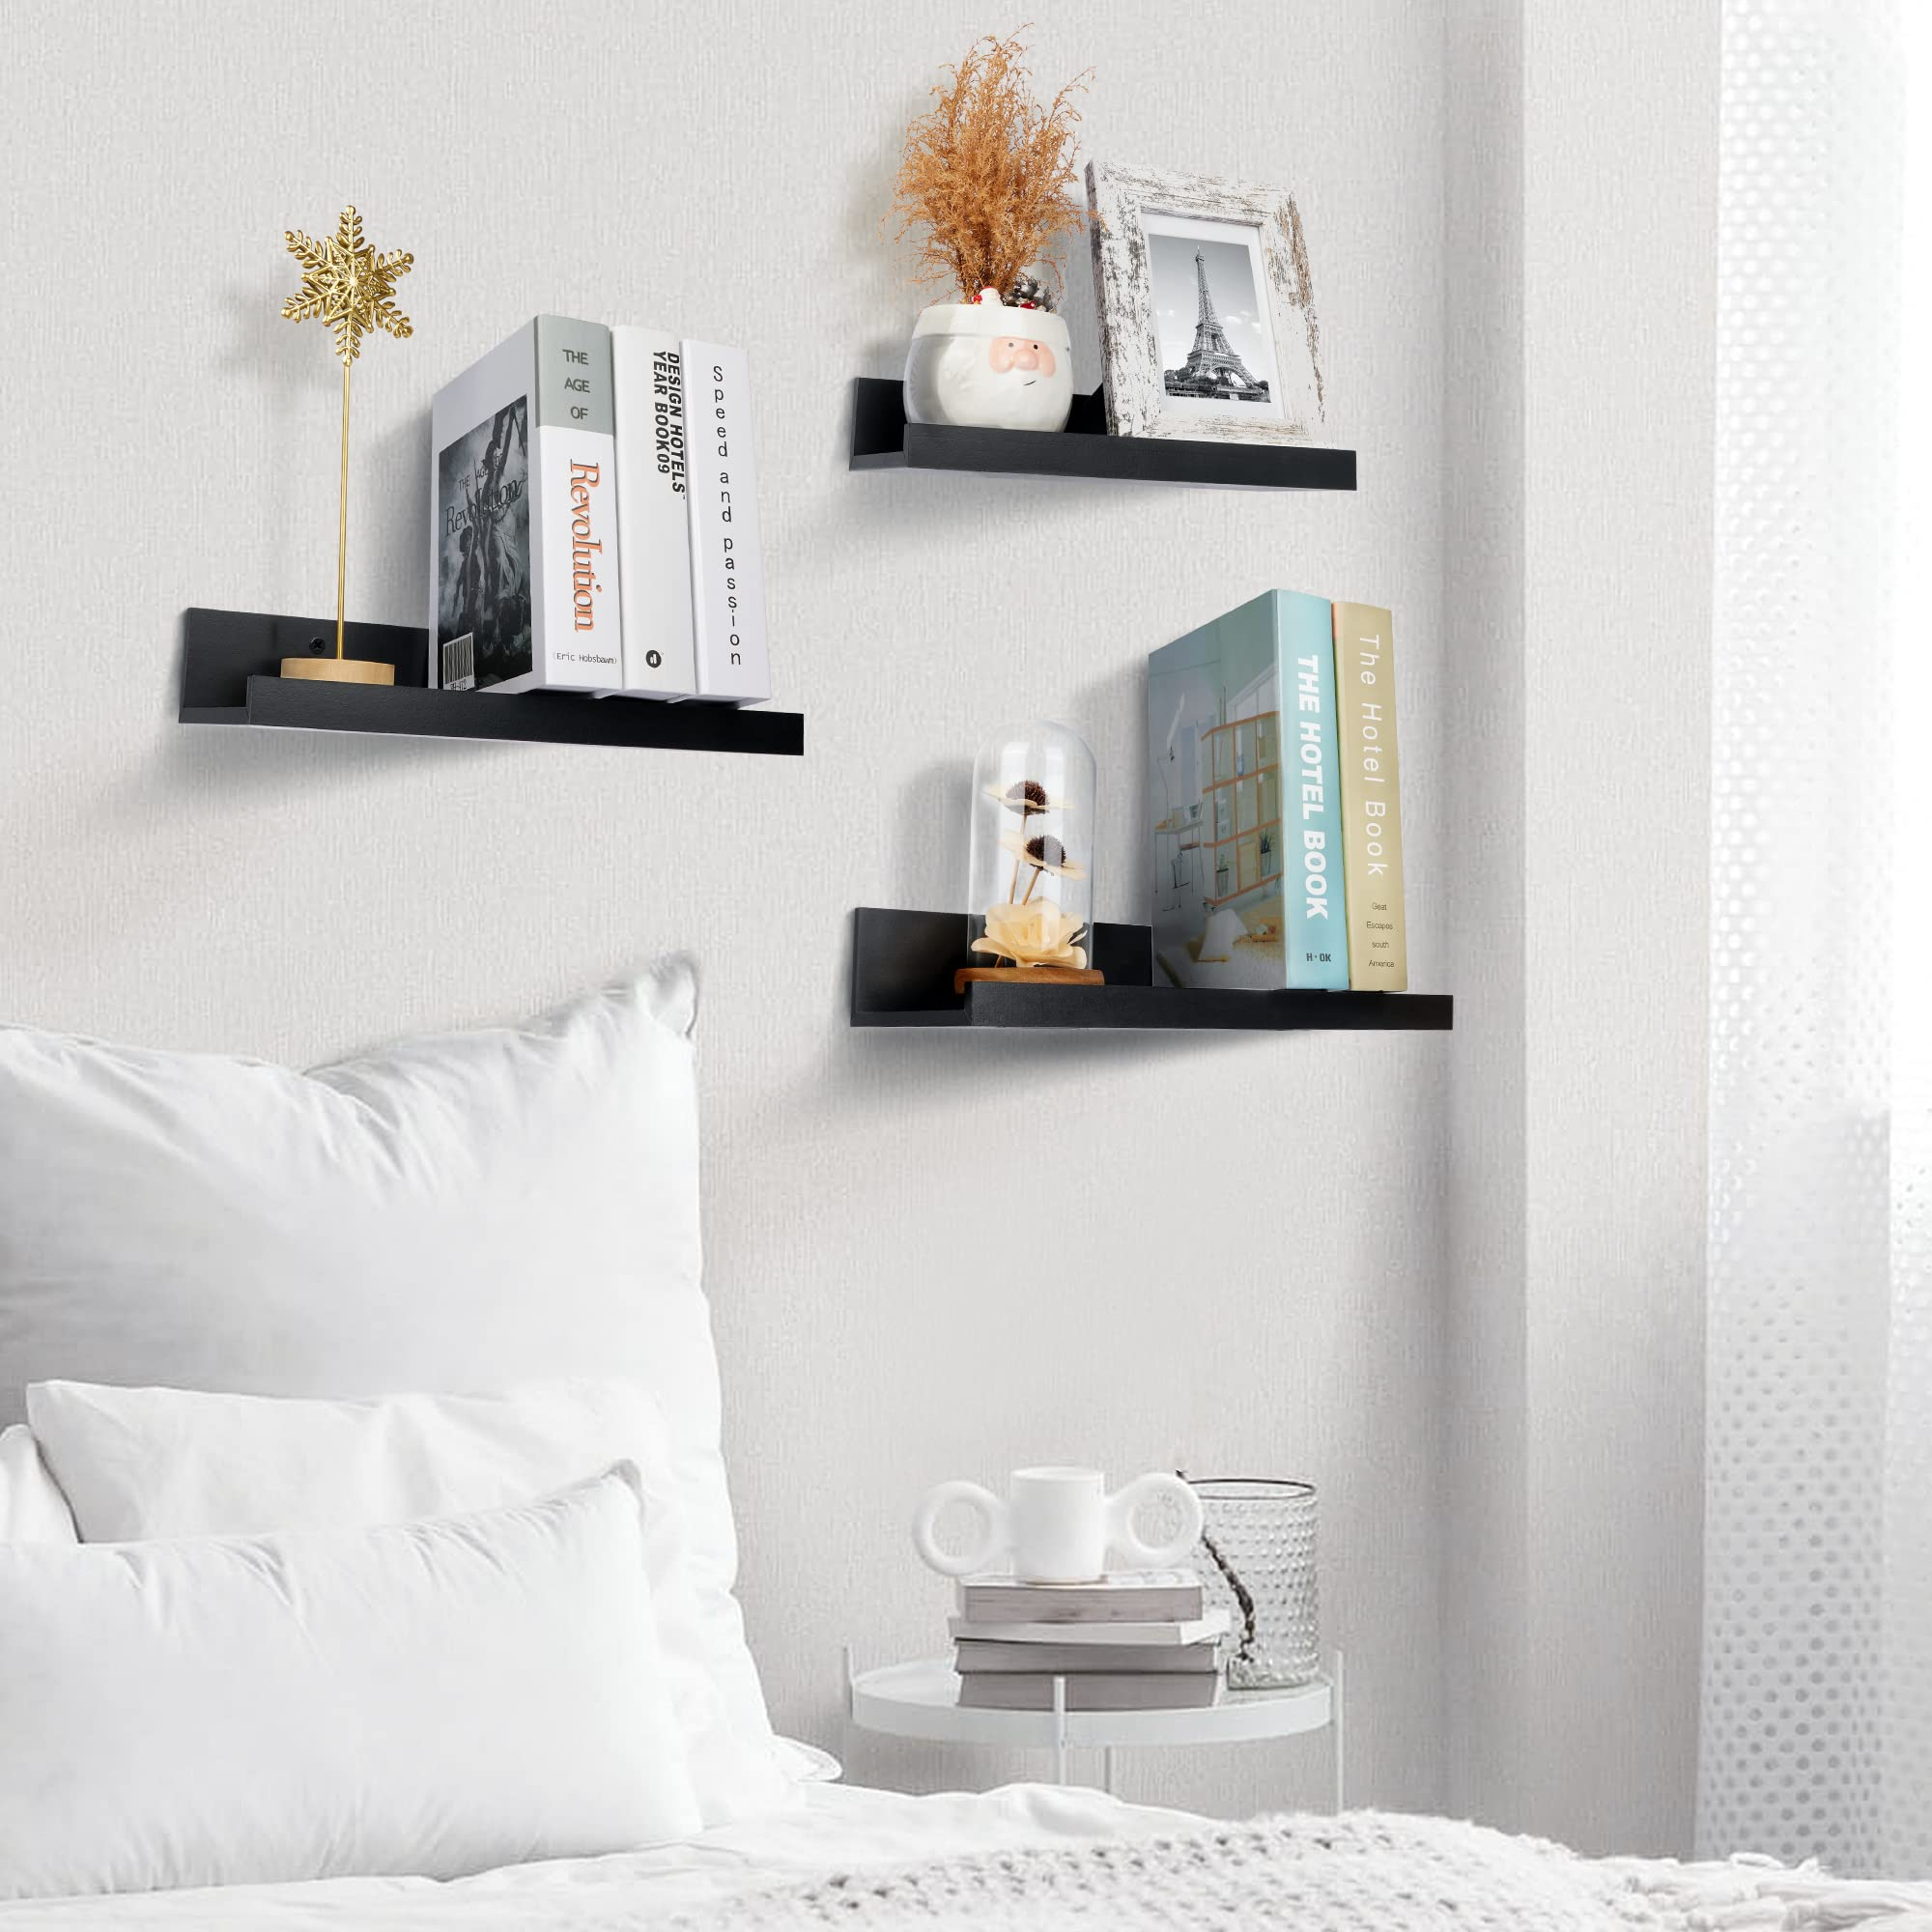 Upsimples Home Floating Shelves for Wall Decor Storage, Wall Shelves Set of  5, Wall Mounted Wood Shelves for Bedroom, Living Room, Bathroom, Kitchen